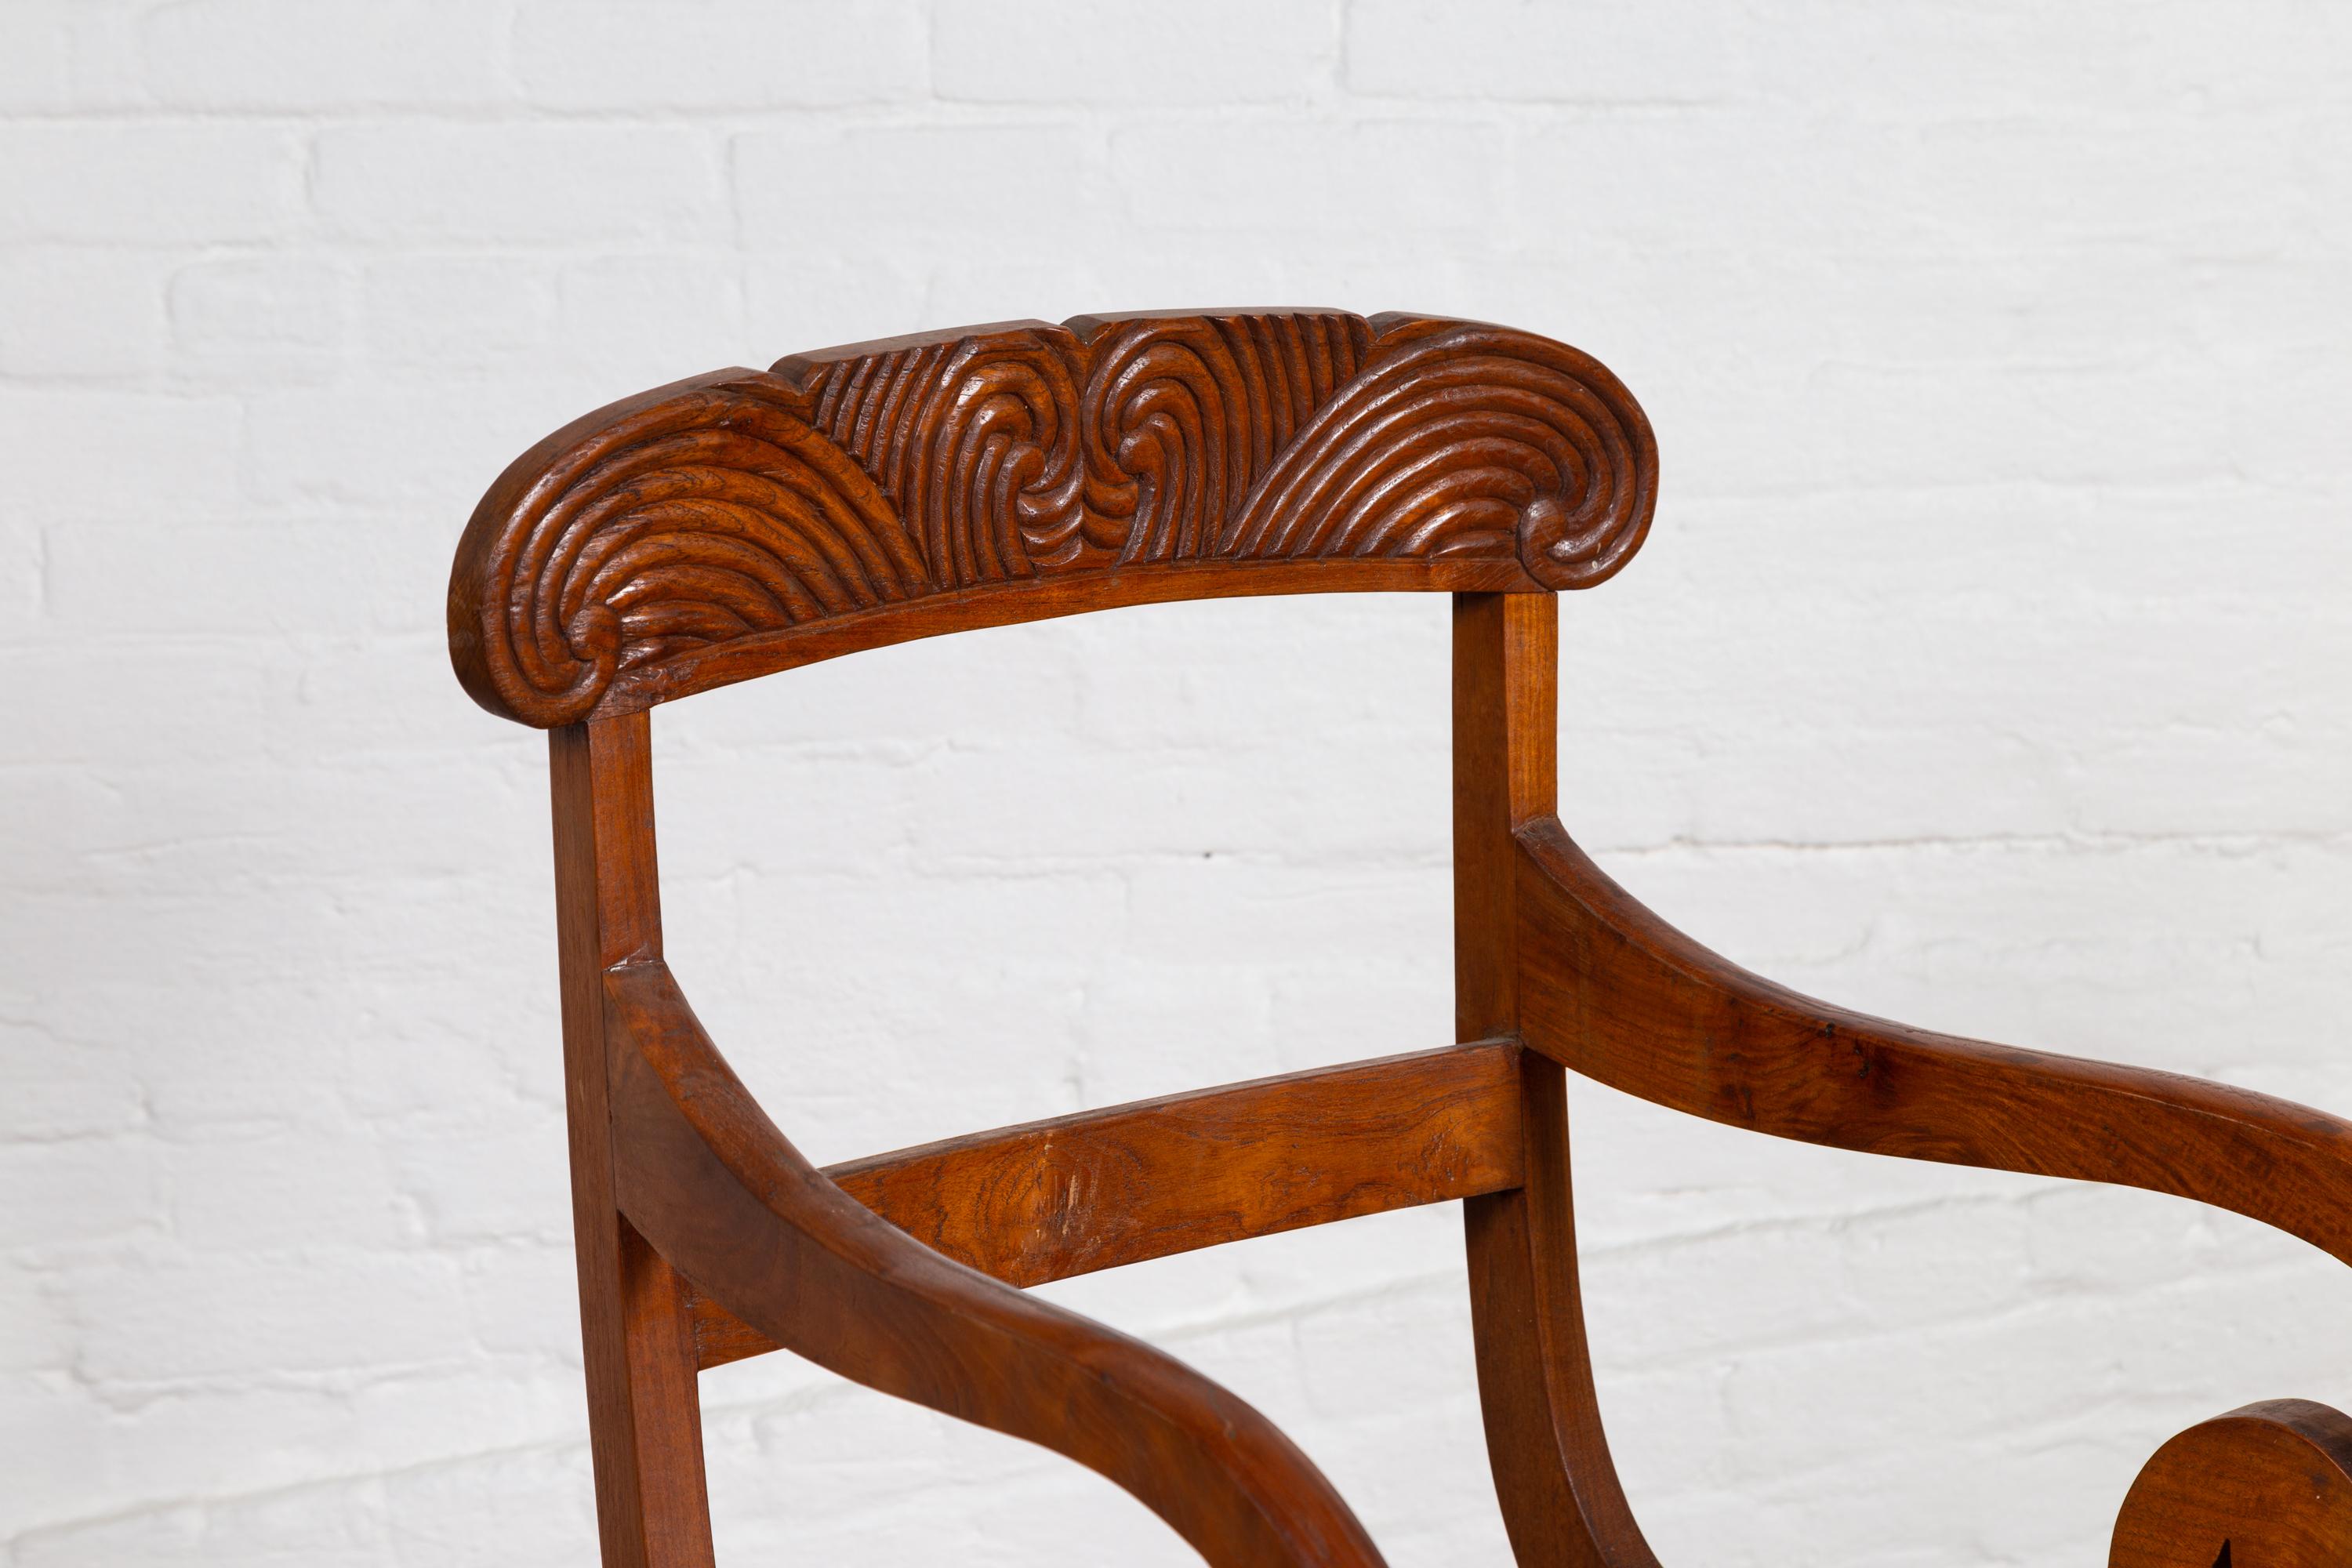 Javanese Antique Armchair with Carved Rail, Woven Rattan Seat and Curving Arms 1